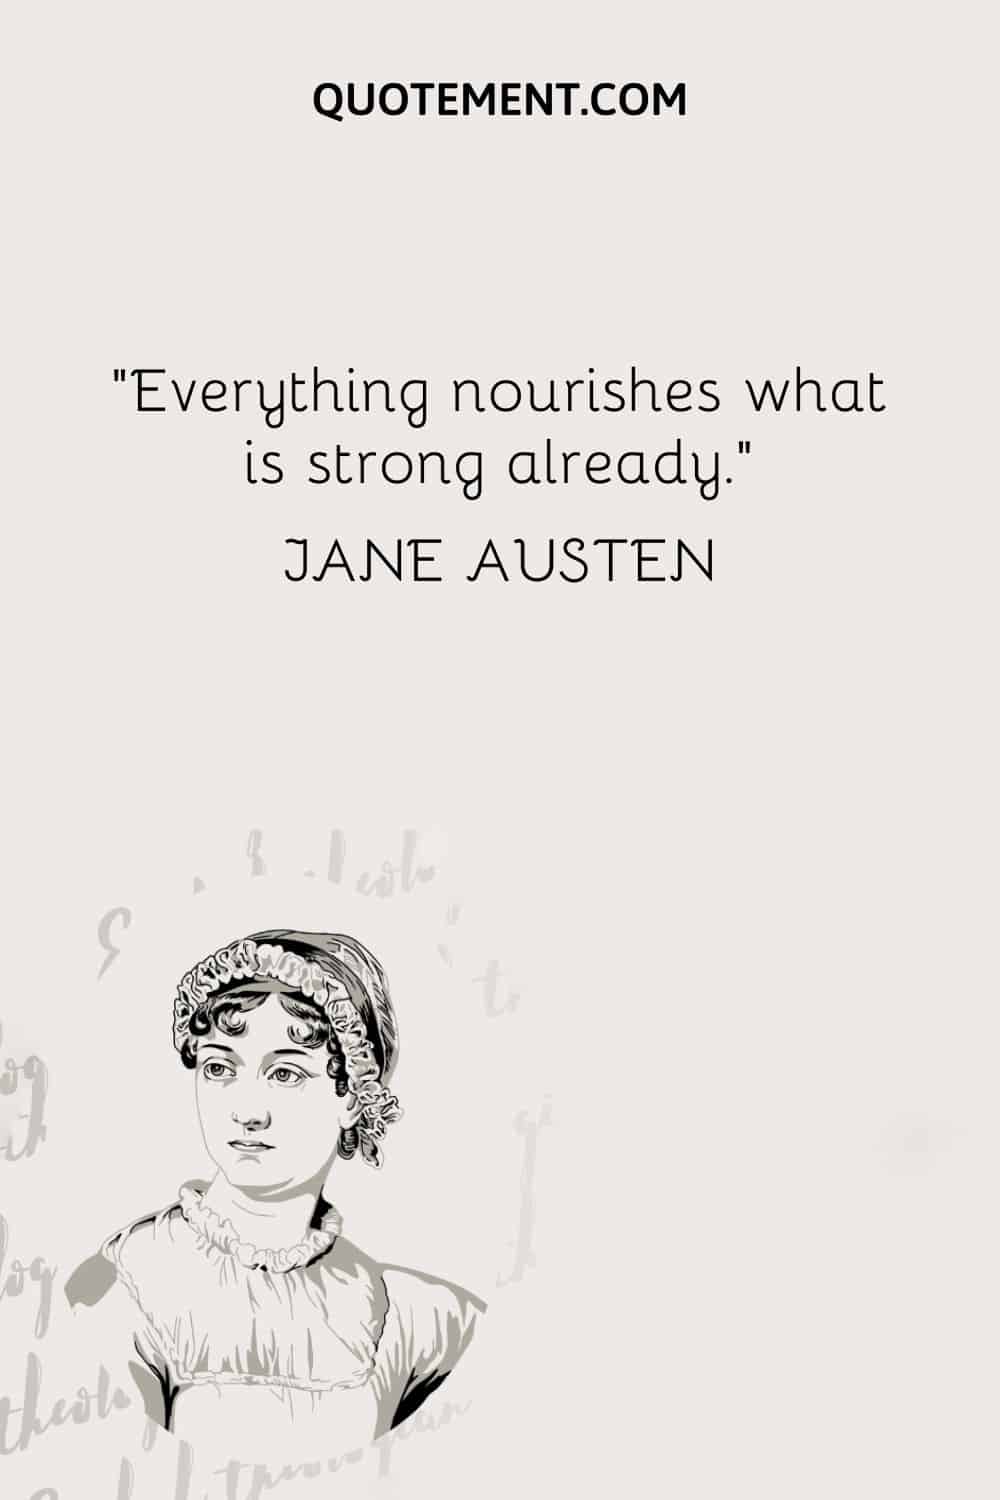 Everything nourishes what is strong already. — Jane Austen